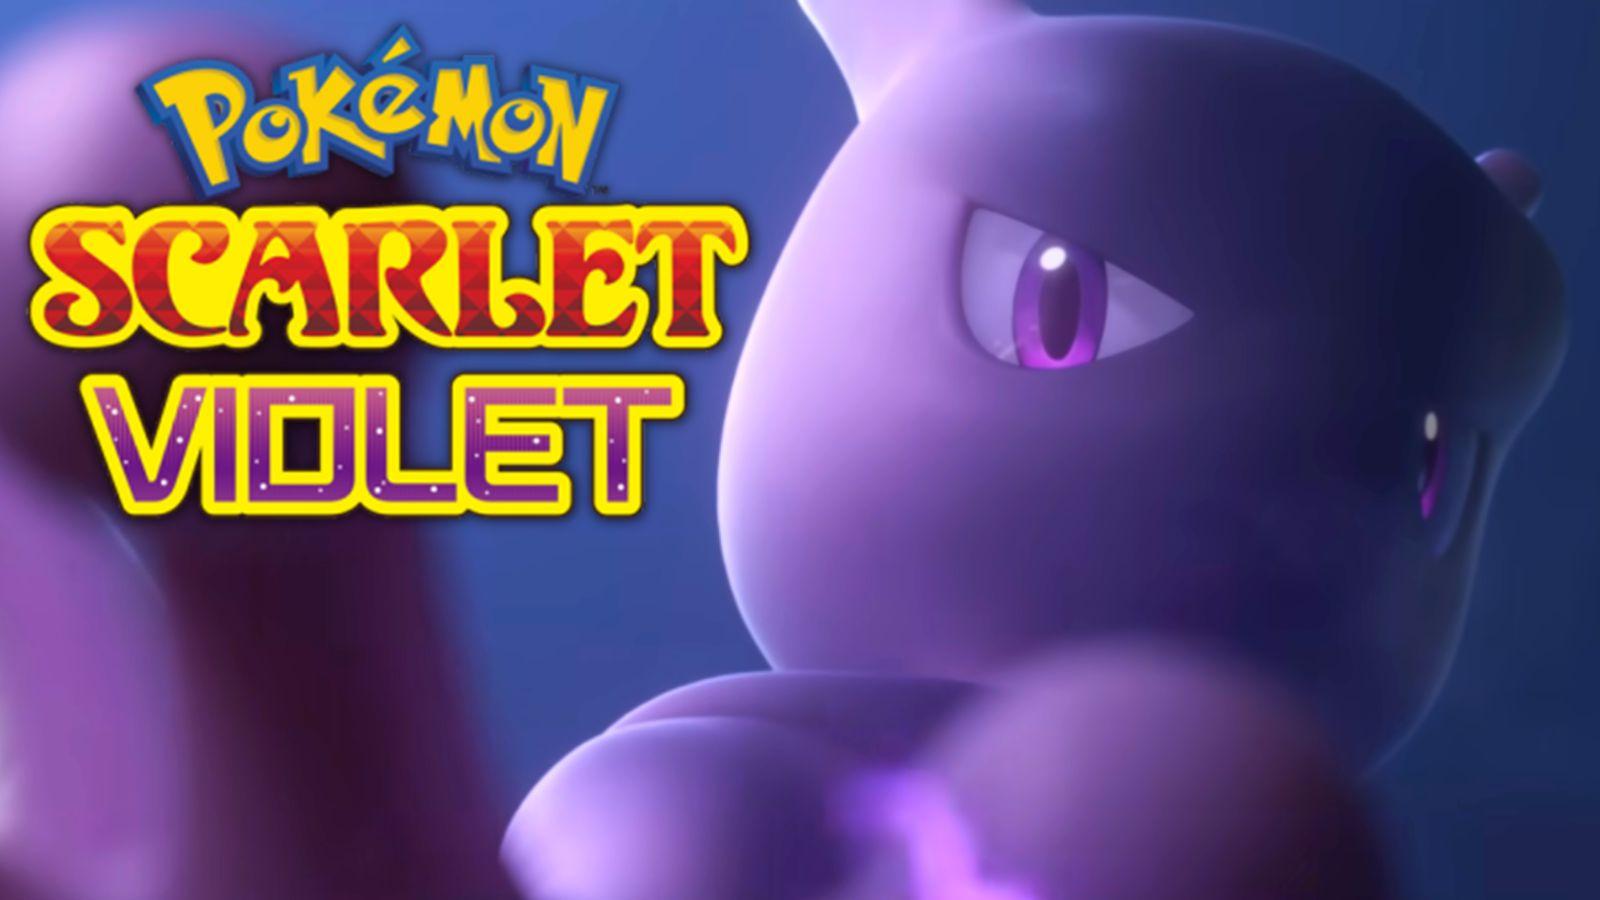 Pokemon Scarlet and Violet Mewtwo